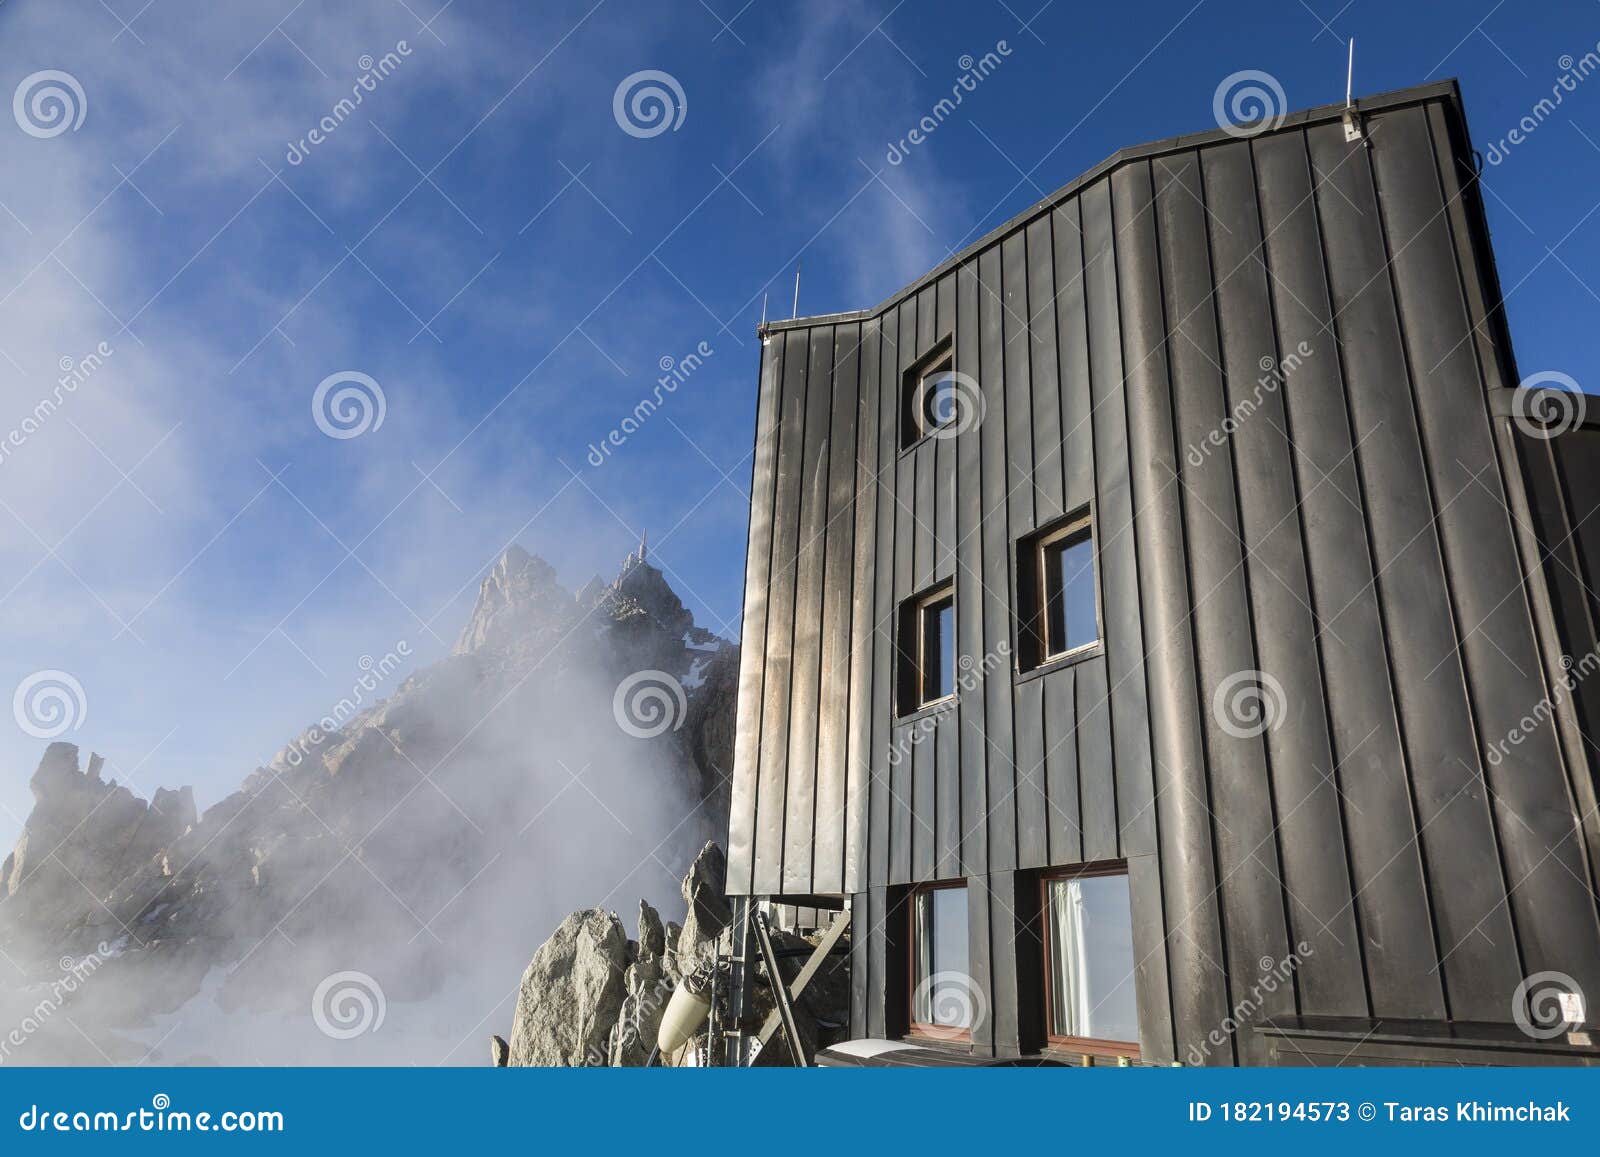 part cosmique refuge and view of aiguille du midi in the fog and clouds in the french alps, chamonix mont-blanc, france